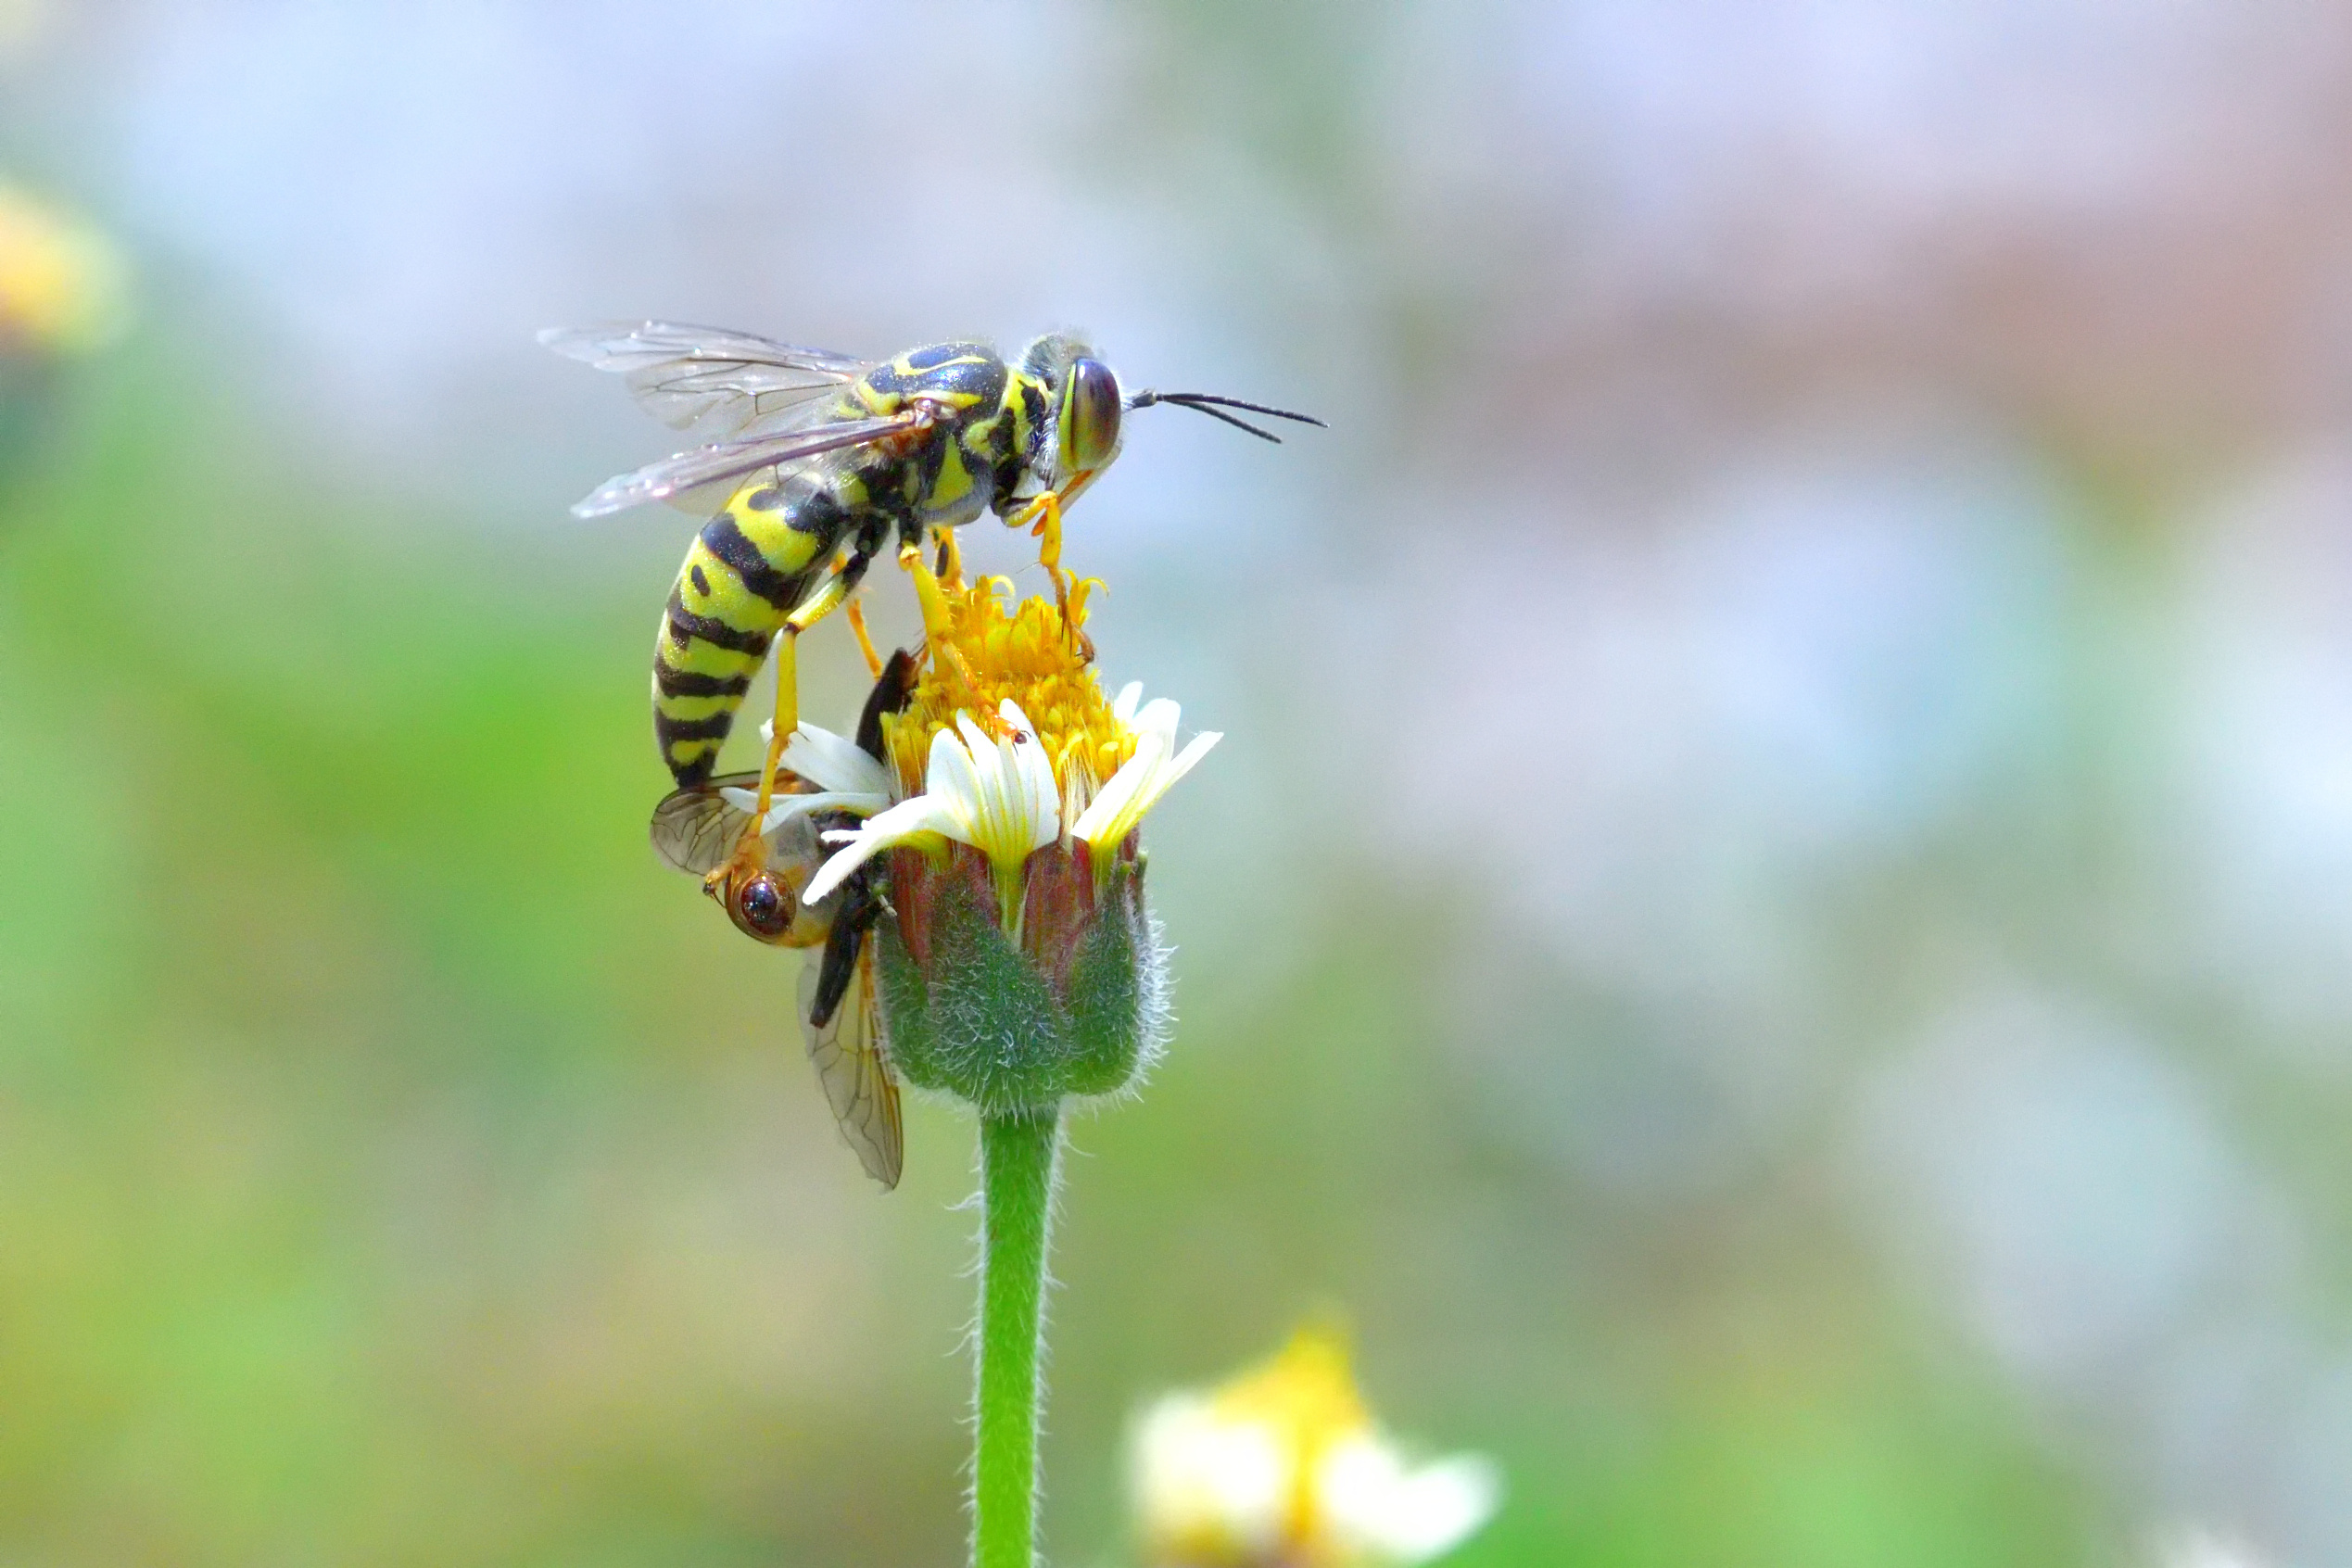 An image of a yellow jacket on a flower - we offer professional yellow jacket removal services in Hillsboro, TX.